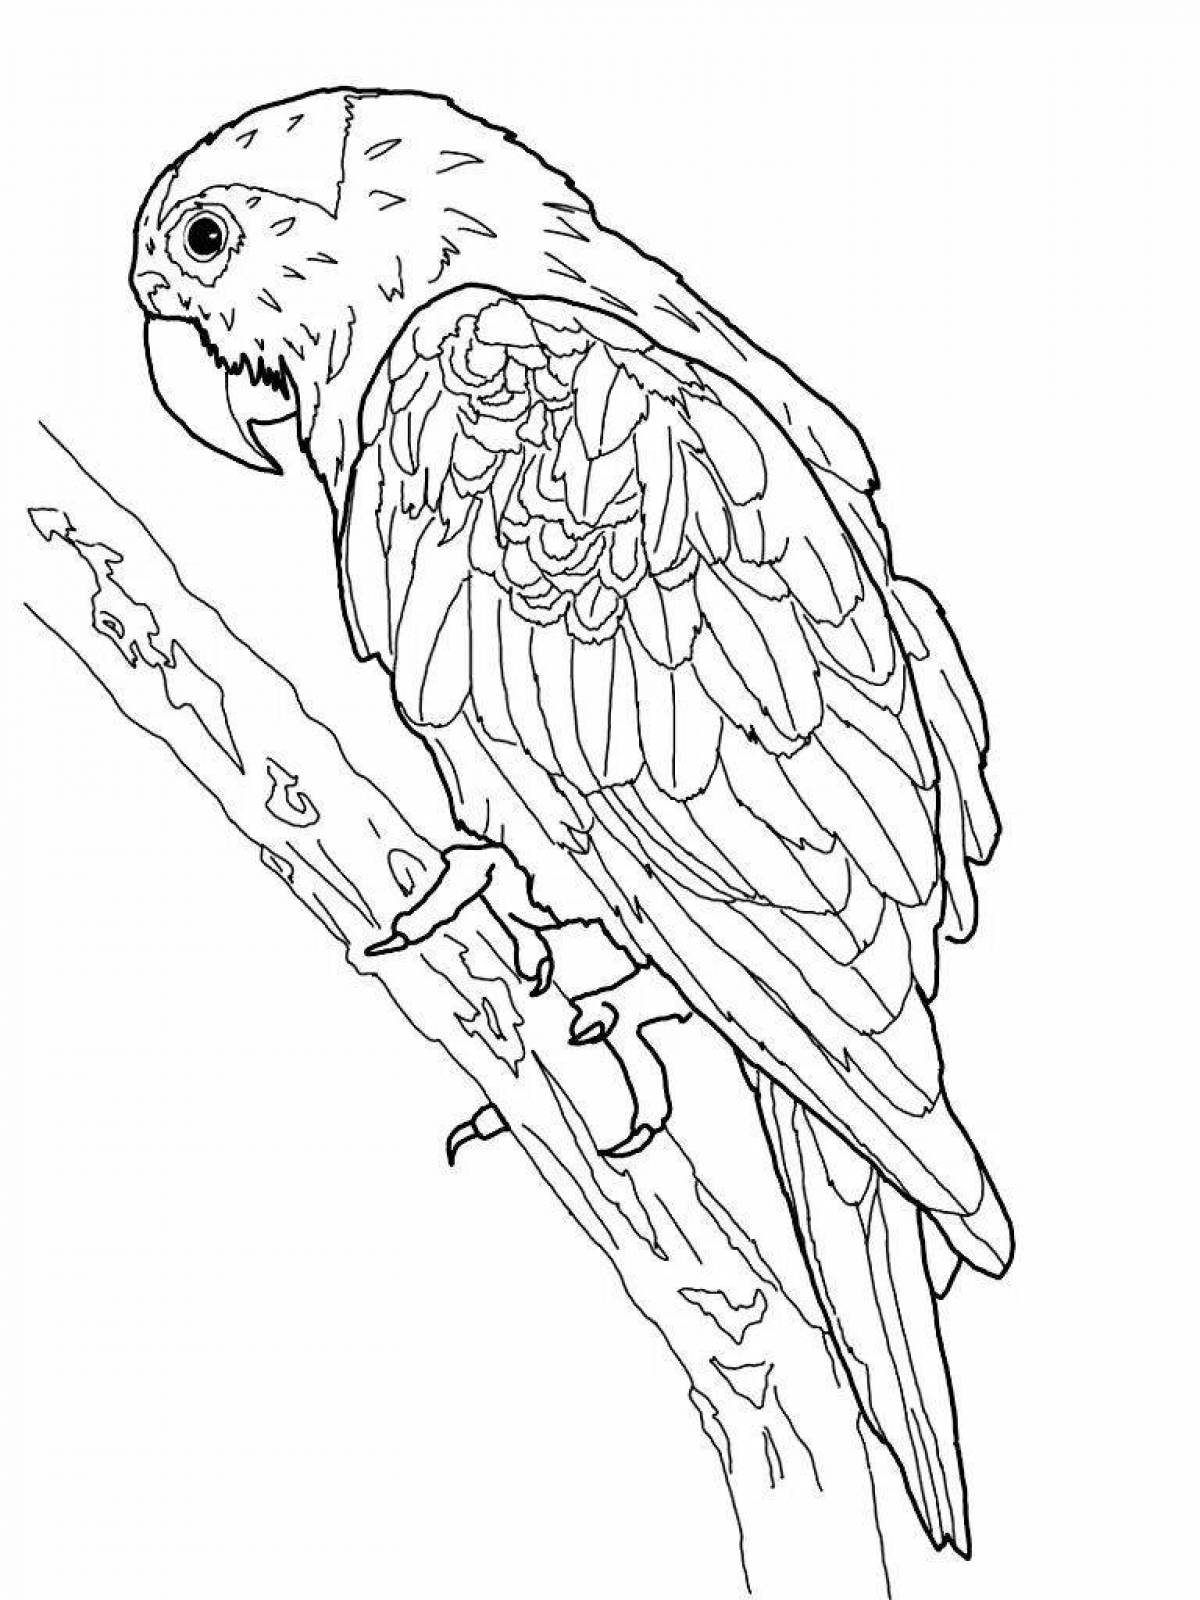 Coloring page dazzling parrot